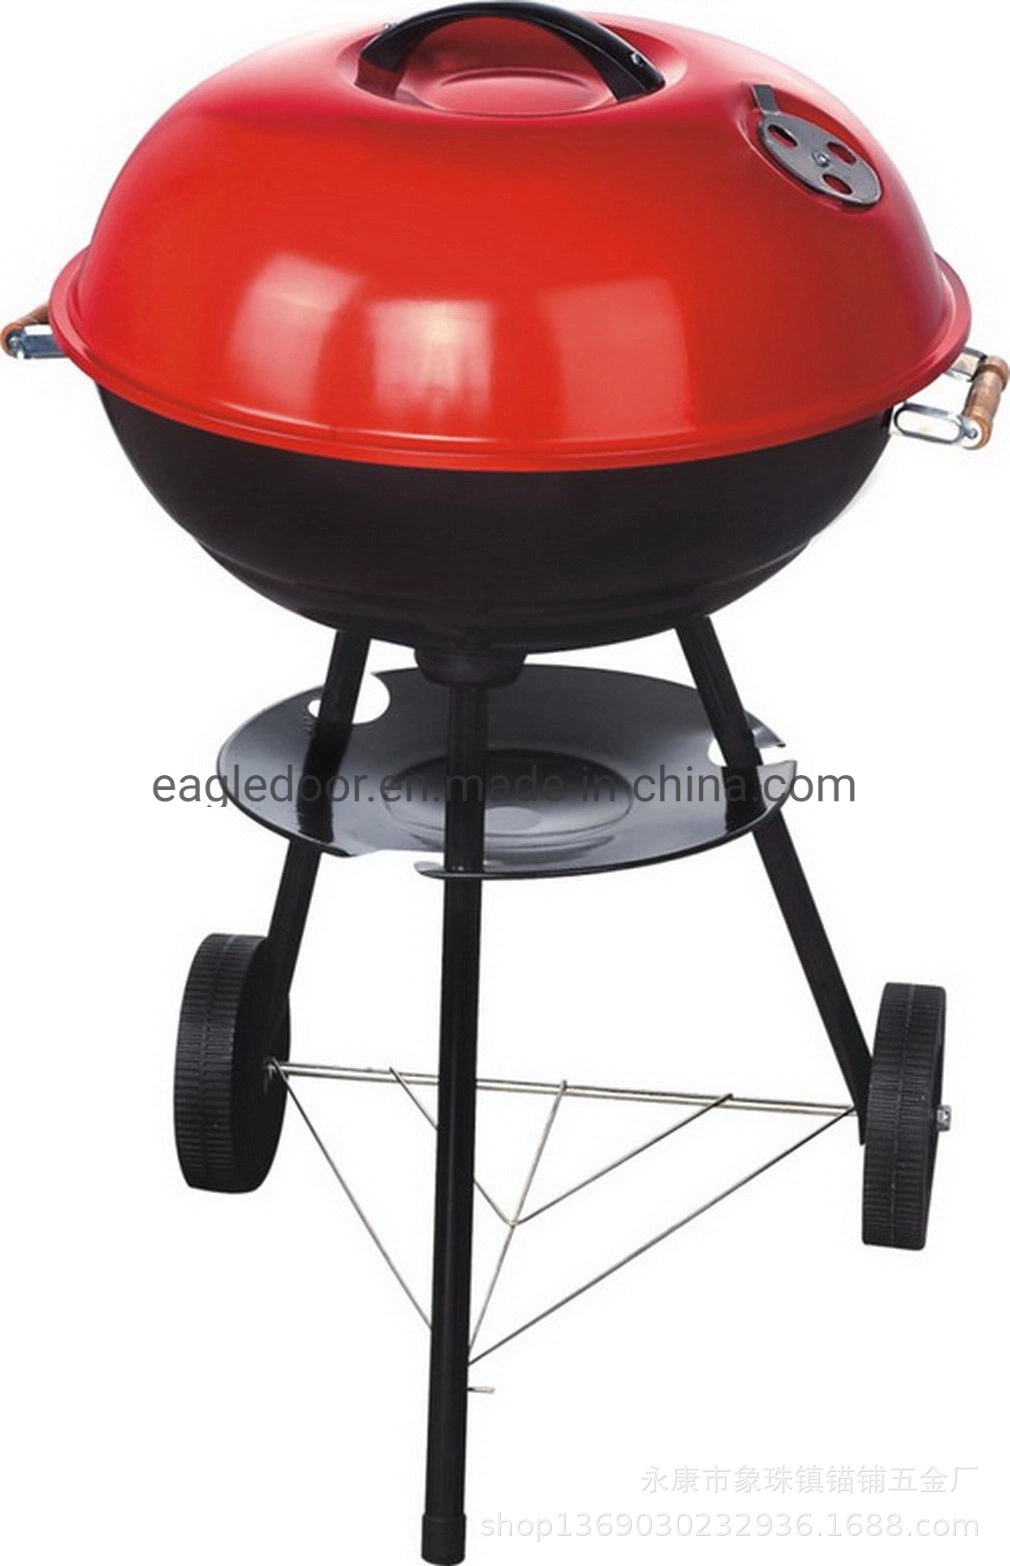 17" BBQ Grill Charcoal Barbecue Grill Kettle BBQ, Outdoor Smokers BBQ Round Portable Charcoal Kettle Grills for Barbecue